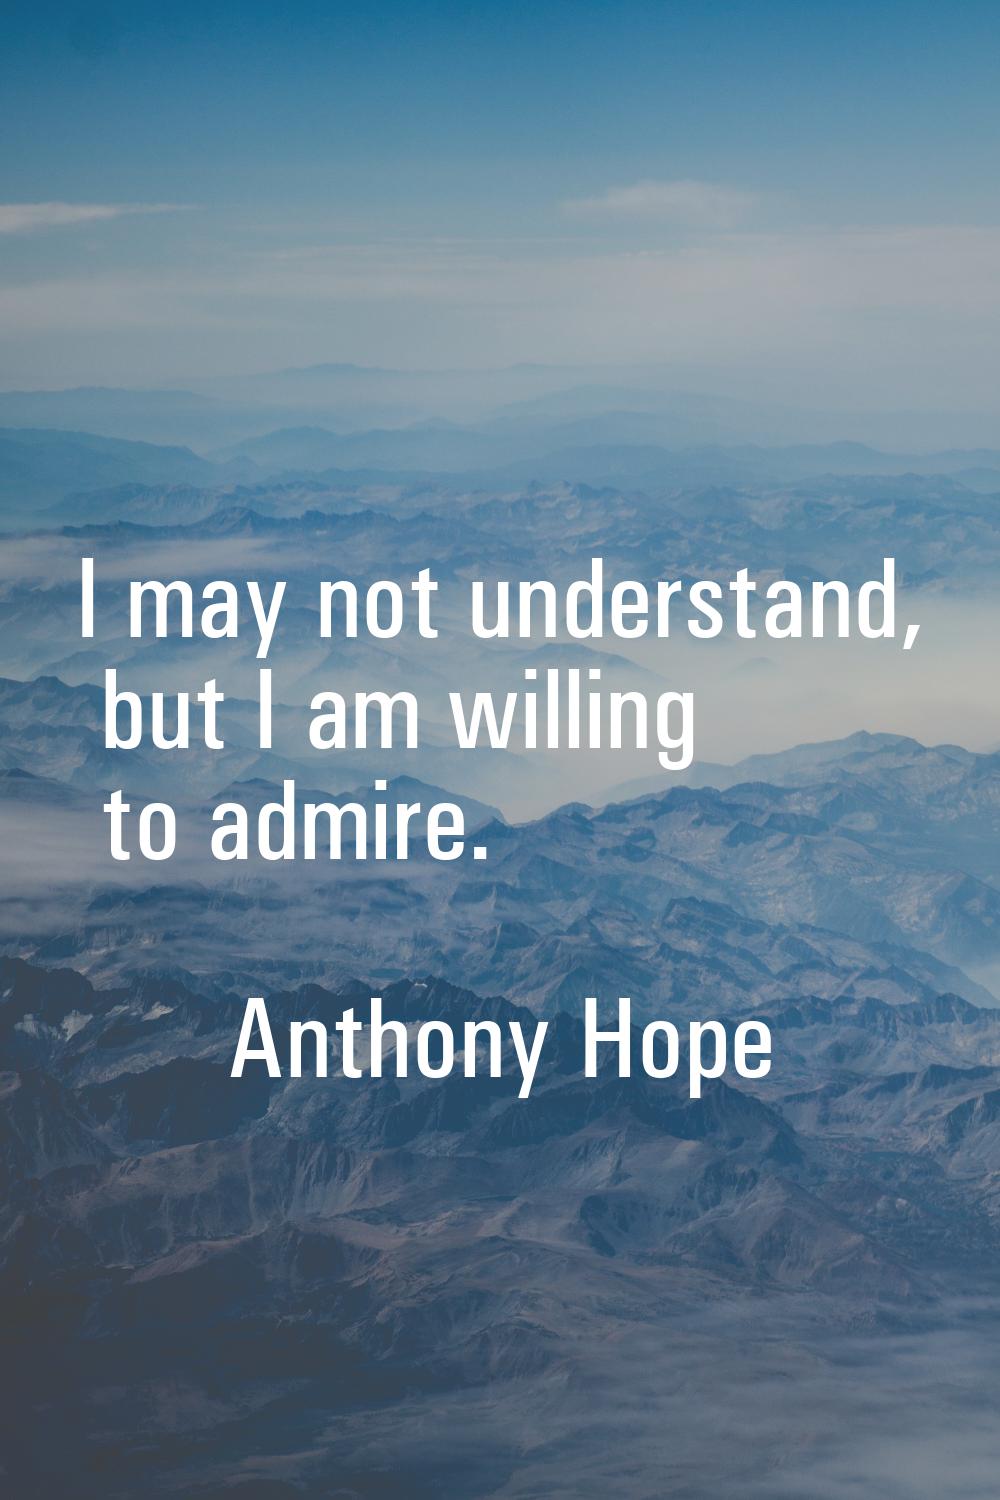 I may not understand, but I am willing to admire.